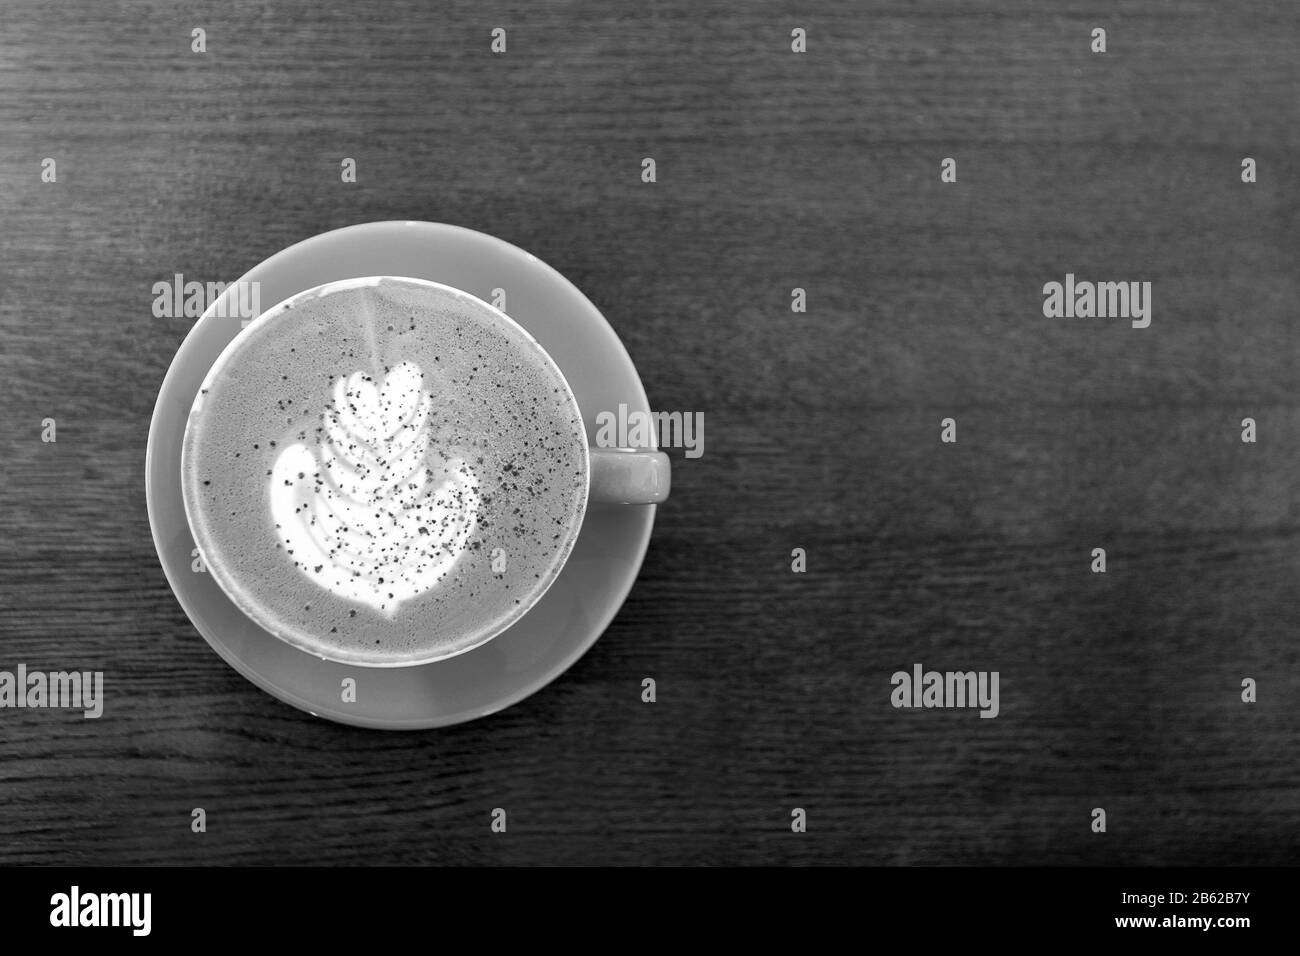 Black and white. Big Coffee cup with milk on the wooden table. cappuccino or latte drink, cup of coffee on table flat lay view. Cup of cafe au lait Stock Photo